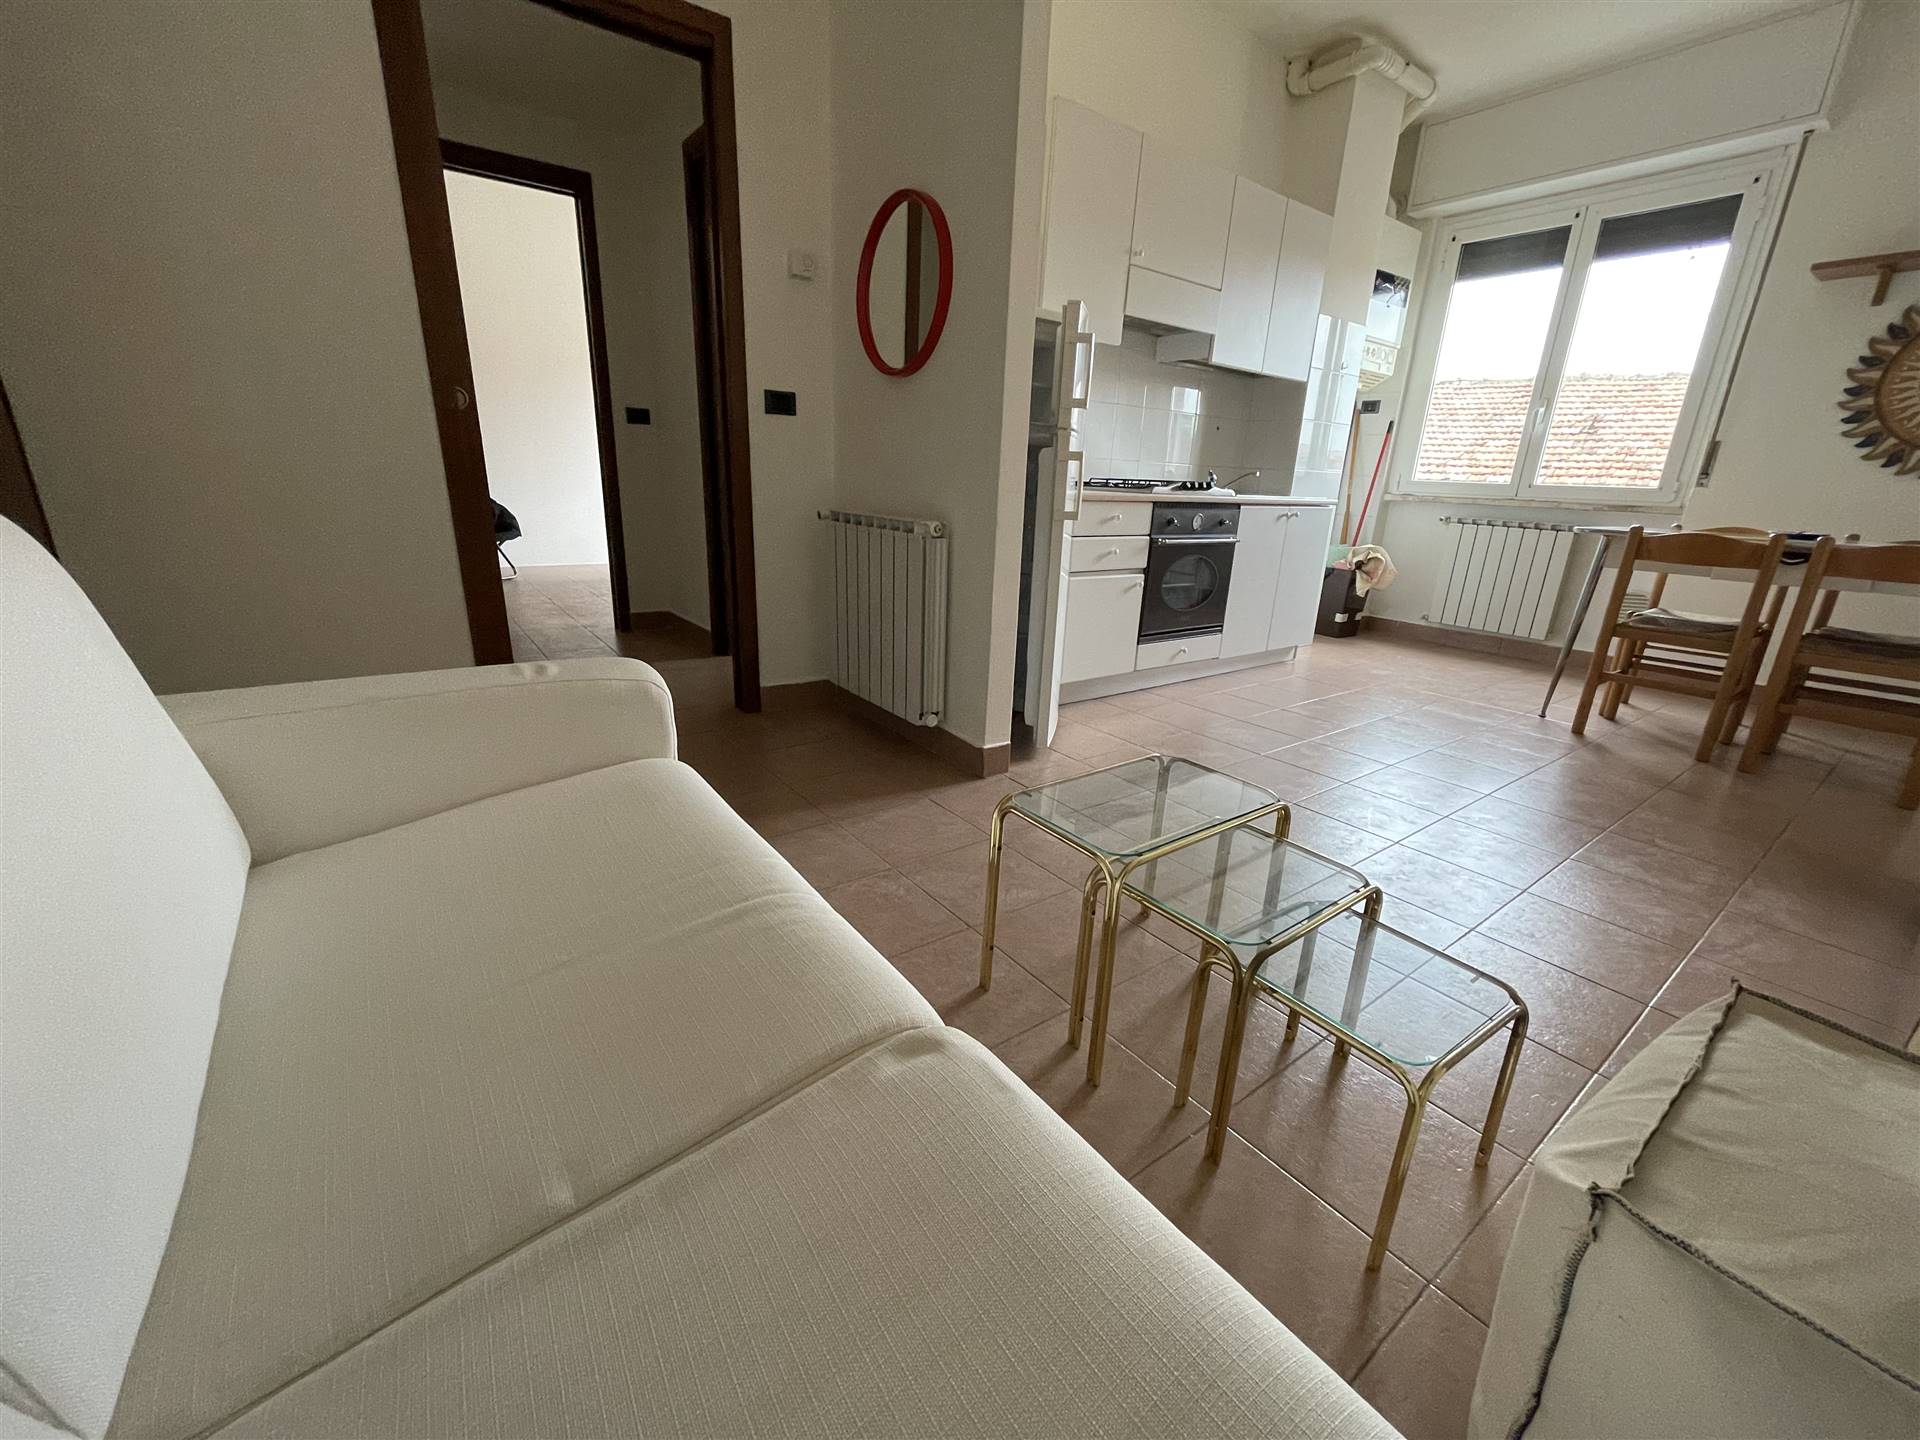 LODI VECCHIO, Apartment for rent of 49 Sq. mt., Habitable, Heating Individual heating system, Energetic class: G, Epi: 286,26 kwh/m2 year, placed at 